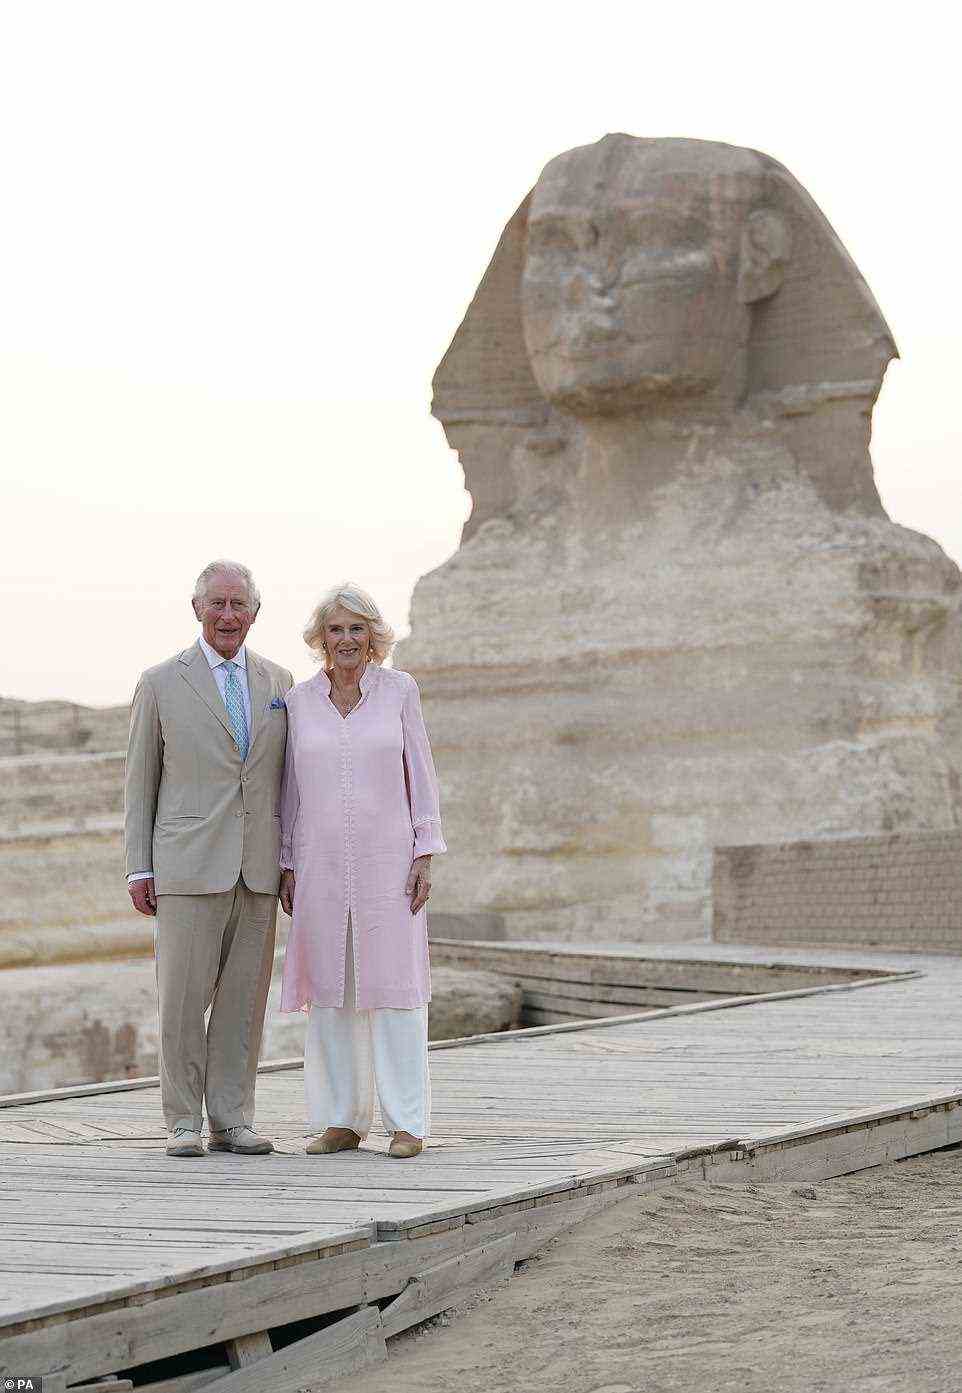 Strike a pose! The Prince of Wales and the beaming Duchess of Cornwall posed together during a visit to the Great Sphinx of Giza (pictured)